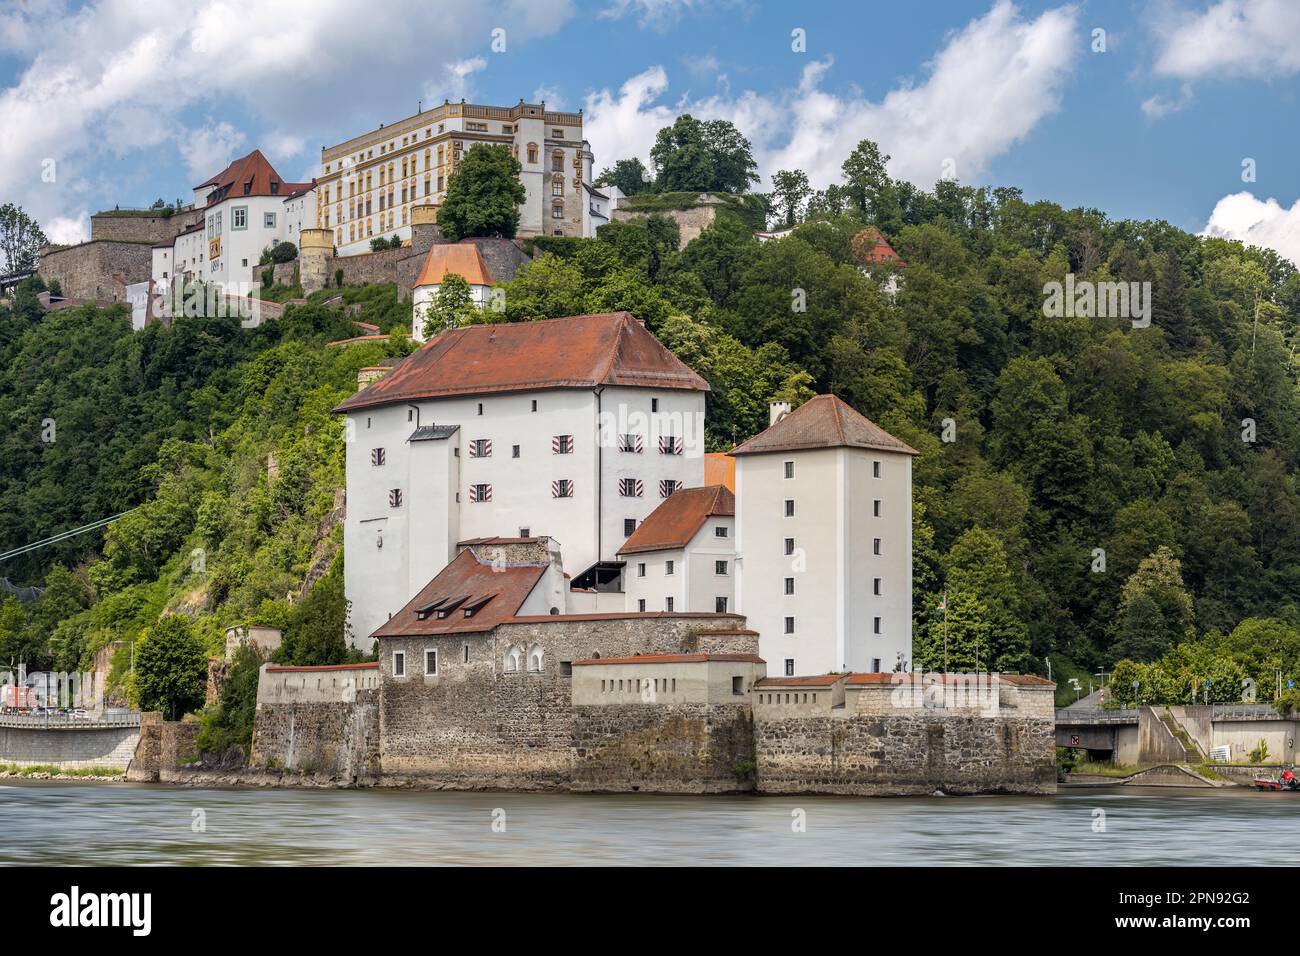 Veste Niederhaus, castle at the confluence of rivers Danube and Ilz, in front of Veste Oberhaus fortress in Passau, Bavaria, Germany Stock Photo